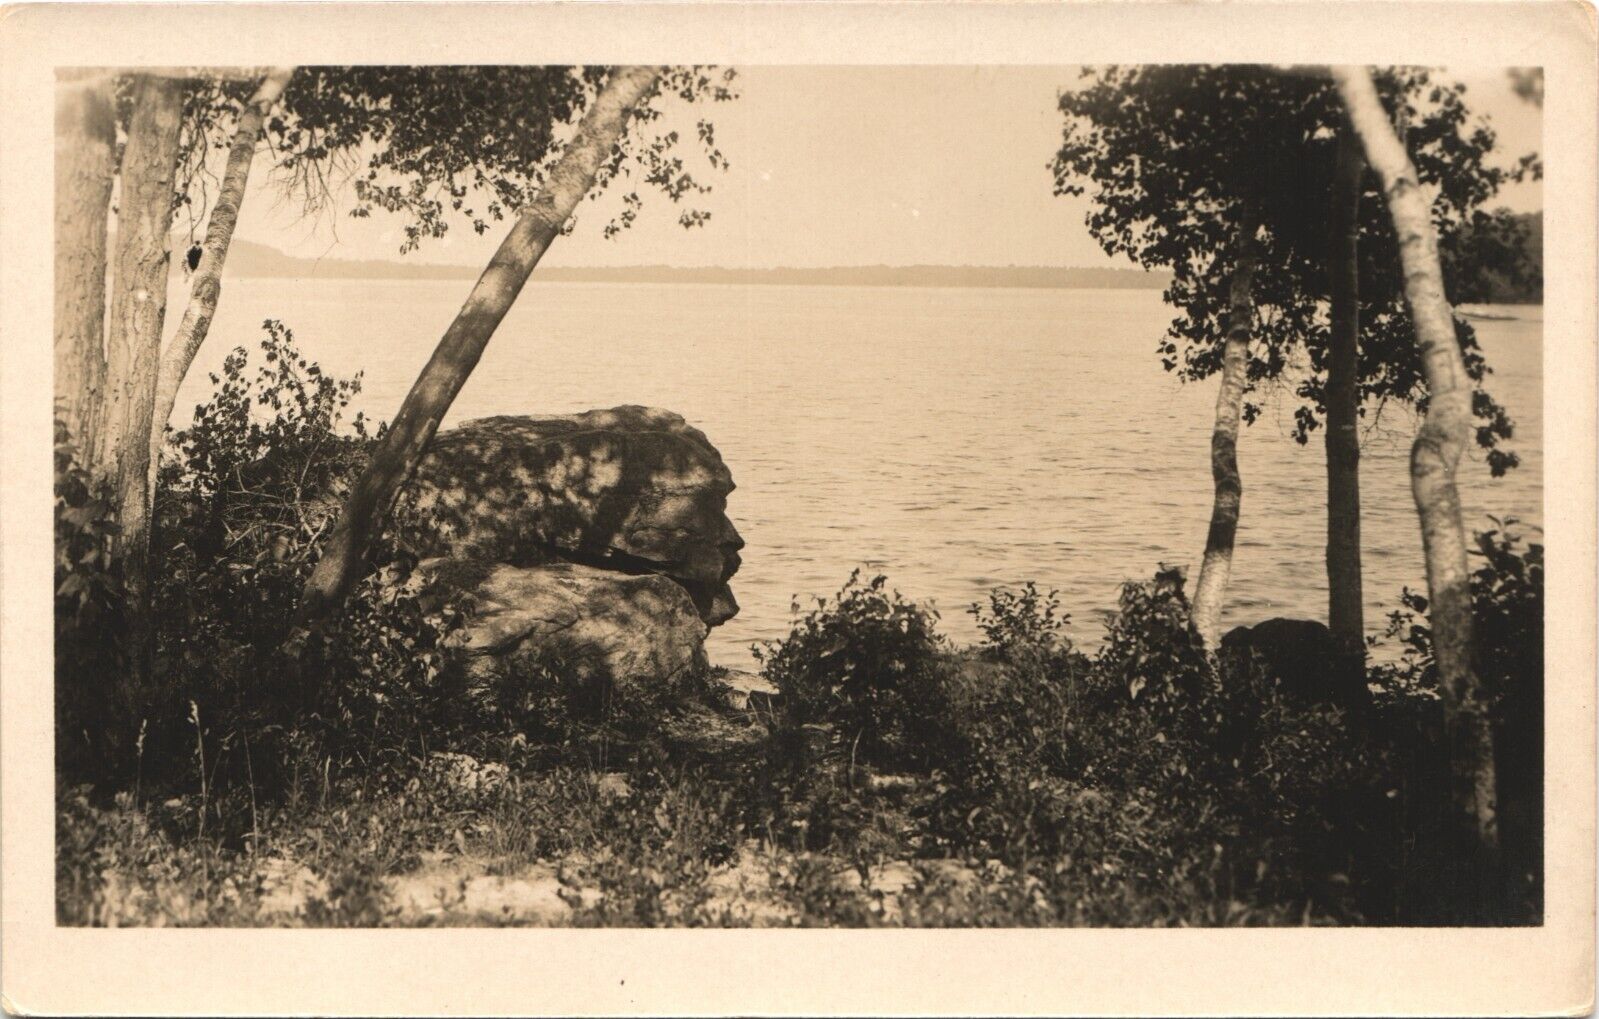 STRANGE FACE ON ROCK antique real photo postcard rppc RARE NATURAL FEATURE